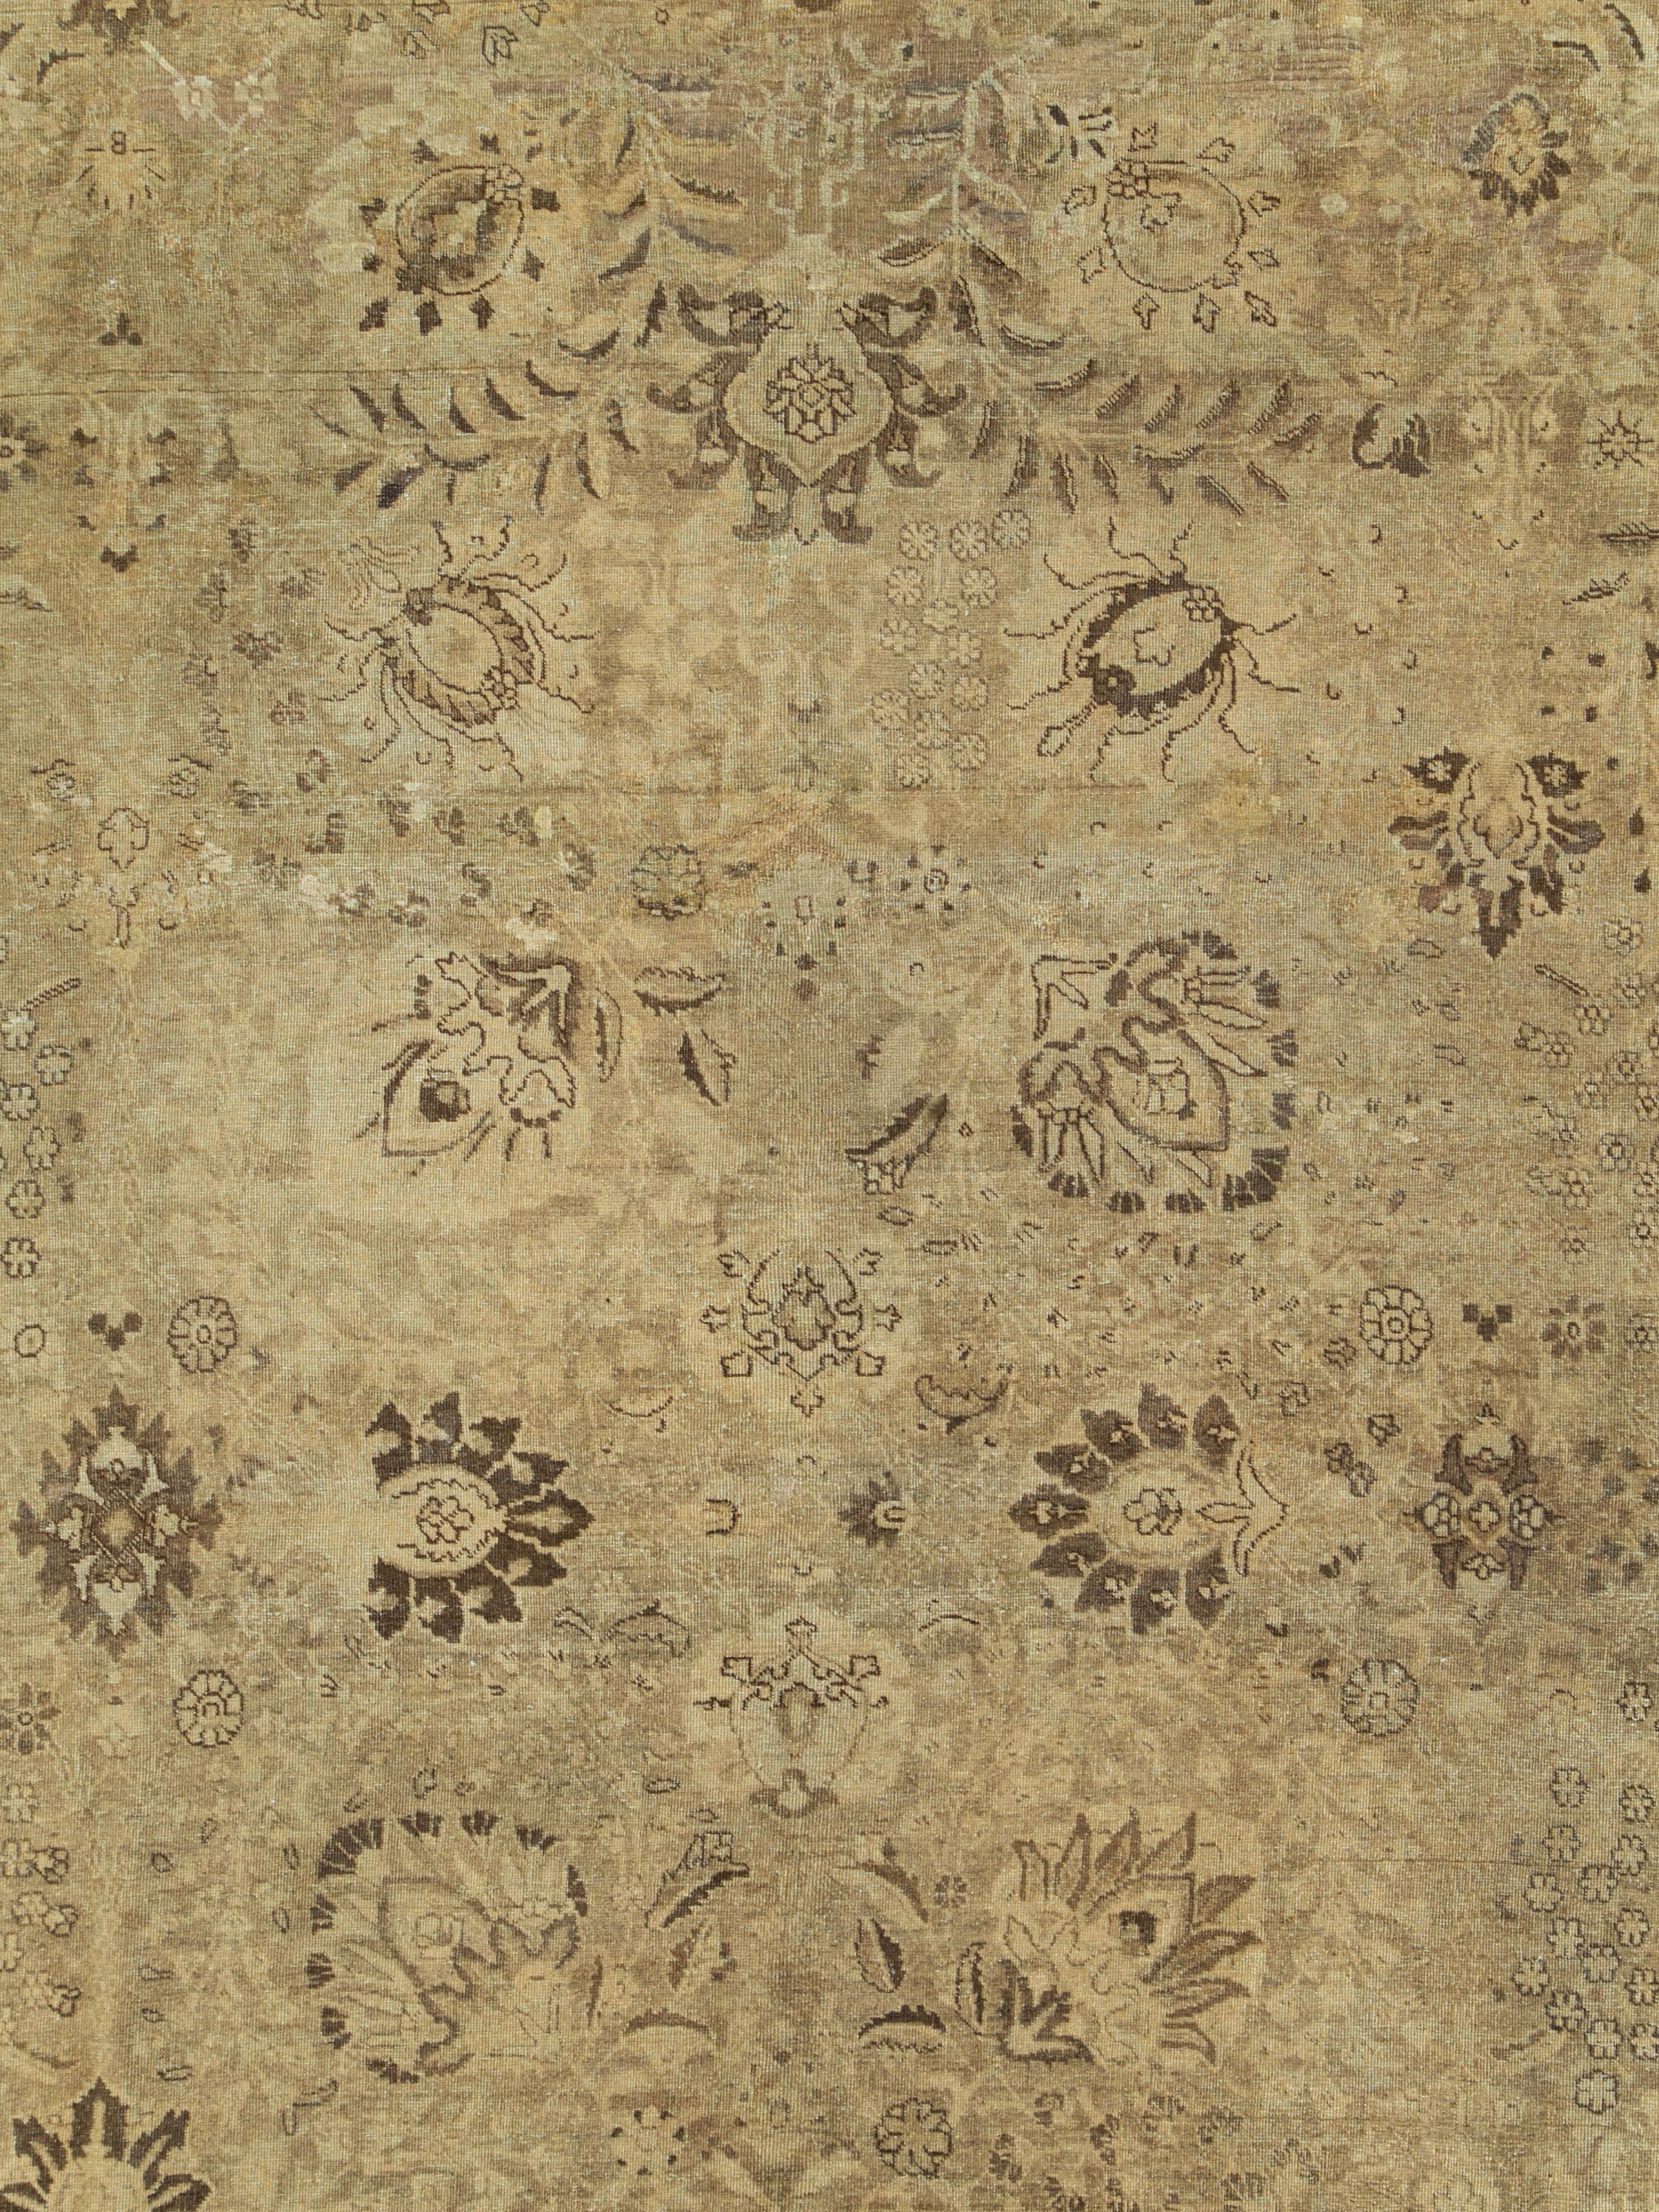 An antique Persian Tabriz carpet in shades of gold from the first quarter of the 20th century.